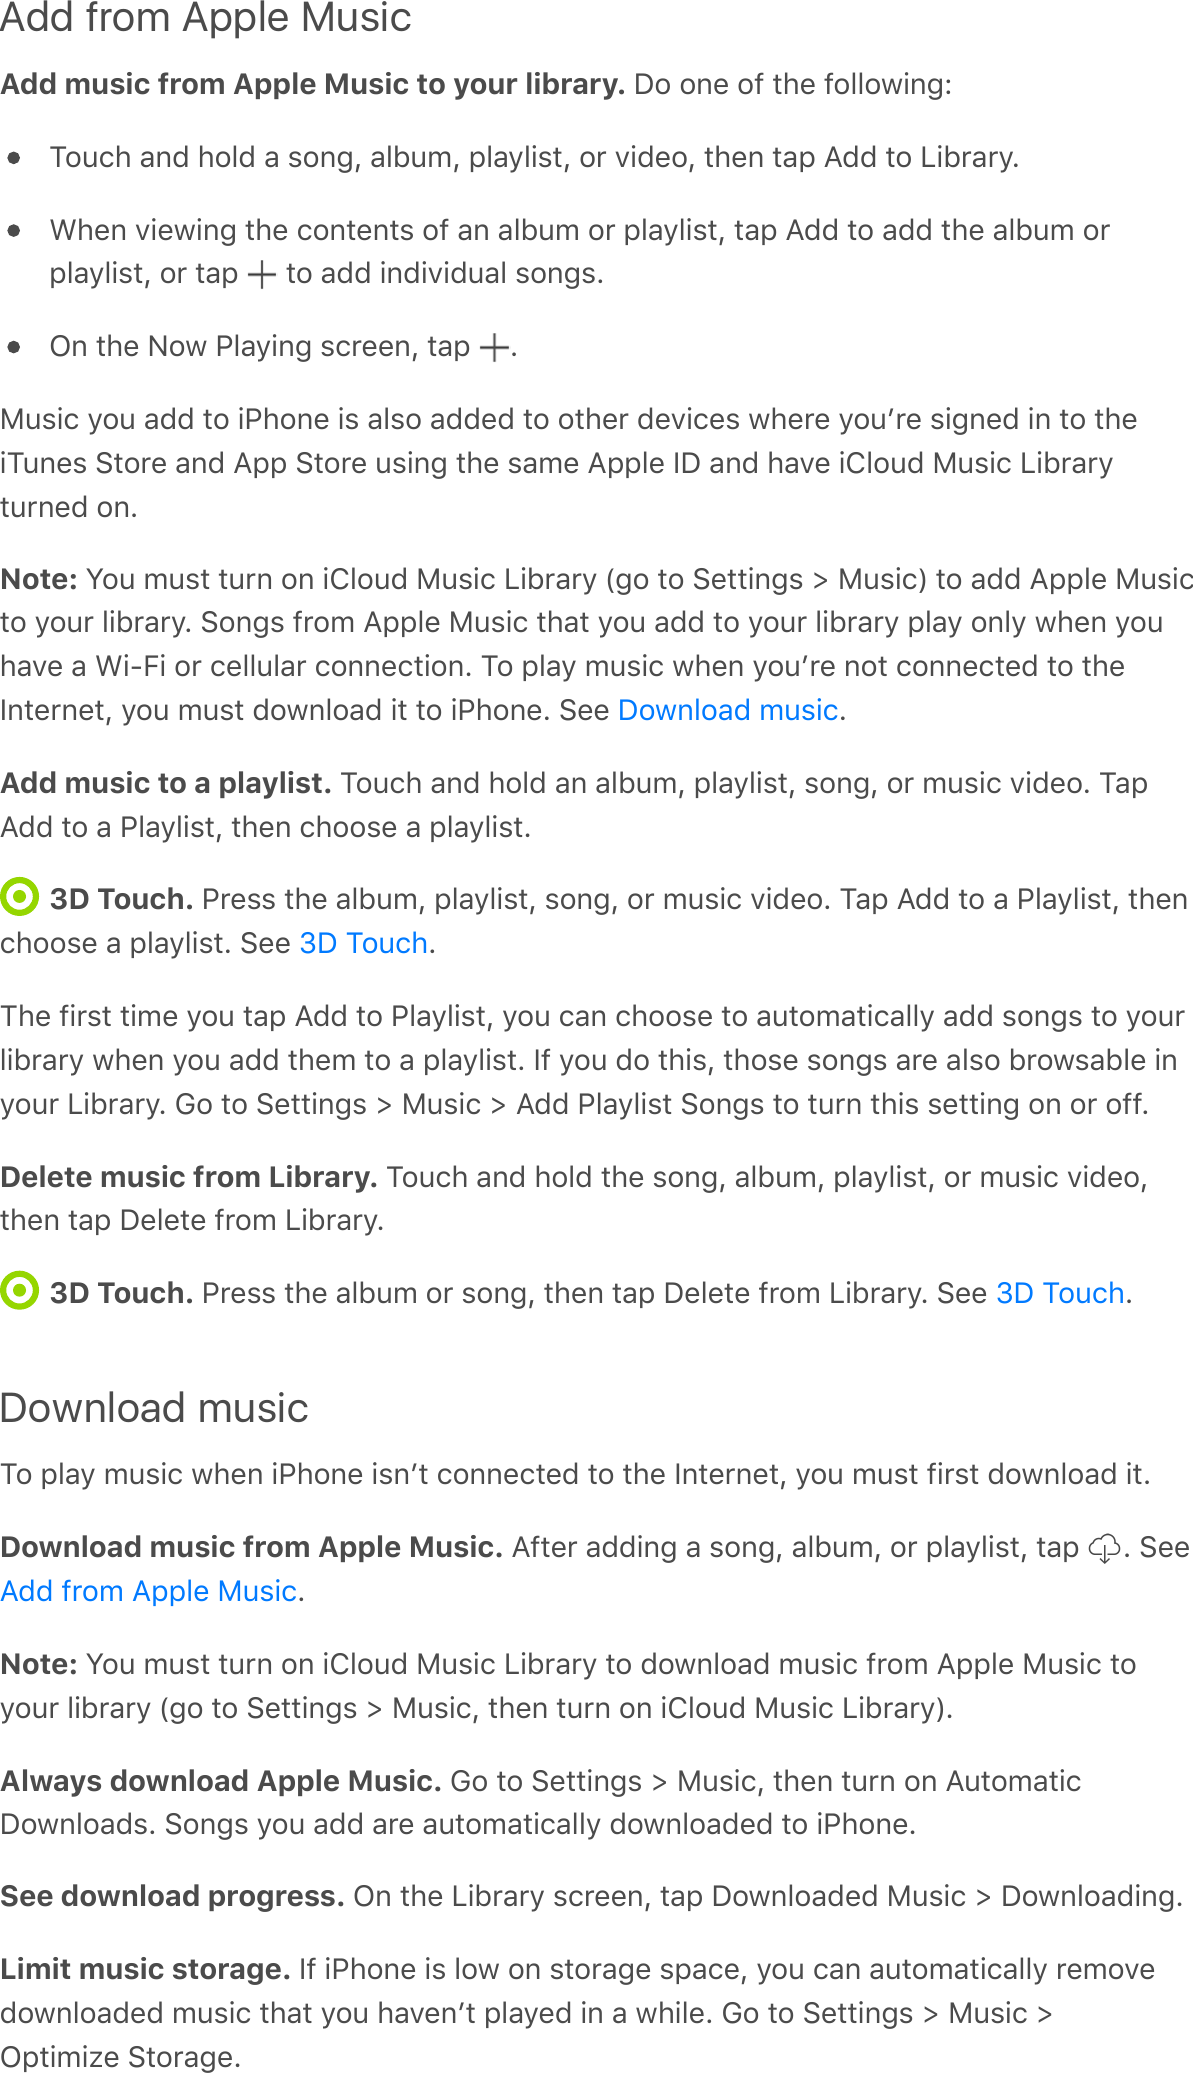 Add from Apple MusicAdd music from Apple Music to your library. &lt;$&apos;$%&amp;&apos;$7&apos;*#&amp;&apos;7$..$3!%4R?$6/#&apos;-%C&apos;#$.C&apos;-&apos;,$%4Q&apos;-.F69Q&apos;;.-&gt;.!,*Q&apos;$0&apos;A!C&amp;$Q&apos;*#&amp;%&apos;*-;&apos;BCC&apos;*$&apos;D!F0-0&gt;GL#&amp;%&apos;A!&amp;3!%4&apos;*#&amp;&apos;/$%*&amp;%*,&apos;$7&apos;-%&apos;-.F69&apos;$0&apos;;.-&gt;.!,*Q&apos;*-;&apos;BCC&apos;*$&apos;-CC&apos;*#&amp;&apos;-.F69&apos;$0;.-&gt;.!,*Q&apos;$0&apos;*-;&apos; &apos;*$&apos;-CC&apos;!%C!A!C6-.&apos;,$%4,GN%&apos;*#&amp;&apos;E$3&apos;&quot;.-&gt;!%4&apos;,/0&amp;&amp;%Q&apos;*-;&apos; GH6,!/&apos;&gt;$6&apos;-CC&apos;*$&apos;!&quot;#$%&amp;&apos;!,&apos;-.,$&apos;-CC&amp;C&apos;*$&apos;$*#&amp;0&apos;C&amp;A!/&amp;,&apos;3#&amp;0&amp;&apos;&gt;$6+0&amp;&apos;,!4%&amp;C&apos;!%&apos;*$&apos;*#&amp;!?6%&amp;,&apos;:*$0&amp;&apos;-%C&apos;B;;&apos;:*$0&amp;&apos;6,!%4&apos;*#&amp;&apos;,-9&amp;&apos;B;;.&amp;&apos;)&lt;&apos;-%C&apos;#-A&amp;&apos;!T.$6C&apos;H6,!/&apos;D!F0-0&gt;*60%&amp;C&apos;$%GNote: S$6&apos;96,*&apos;*60%&apos;$%&apos;!T.$6C&apos;H6,!/&apos;D!F0-0&gt;&apos;\4$&apos;*$&apos;:&amp;**!%4,&apos;e&apos;H6,!/]&apos;*$&apos;-CC&apos;B;;.&amp;&apos;H6,!/*$&apos;&gt;$60&apos;.!F0-0&gt;G&apos;:$%4,&apos;70$9&apos;B;;.&amp;&apos;H6,!/&apos;*#-*&apos;&gt;$6&apos;-CC&apos;*$&apos;&gt;$60&apos;.!F0-0&gt;&apos;;.-&gt;&apos;$%.&gt;&apos;3#&amp;%&apos;&gt;$6#-A&amp;&apos;-&apos;L!85!&apos;$0&apos;/&amp;..6.-0&apos;/$%%&amp;/*!$%G&apos;?$&apos;;.-&gt;&apos;96,!/&apos;3#&amp;%&apos;&gt;$6+0&amp;&apos;%$*&apos;/$%%&amp;/*&amp;C&apos;*$&apos;*#&amp;)%*&amp;0%&amp;*Q&apos;&gt;$6&apos;96,*&apos;C$3%.$-C&apos;!*&apos;*$&apos;!&quot;#$%&amp;G&apos;:&amp;&amp;&apos; GAdd music to a playlist. ?$6/#&apos;-%C&apos;#$.C&apos;-%&apos;-.F69Q&apos;;.-&gt;.!,*Q&apos;,$%4Q&apos;$0&apos;96,!/&apos;A!C&amp;$G&apos;?-;BCC&apos;*$&apos;-&apos;&quot;.-&gt;.!,*Q&apos;*#&amp;%&apos;/#$$,&amp;&apos;-&apos;;.-&gt;.!,*G3D Touch. &quot;0&amp;,,&apos;*#&amp;&apos;-.F69Q&apos;;.-&gt;.!,*Q&apos;,$%4Q&apos;$0&apos;96,!/&apos;A!C&amp;$G&apos;?-;&apos;BCC&apos;*$&apos;-&apos;&quot;.-&gt;.!,*Q&apos;*#&amp;%/#$$,&amp;&apos;-&apos;;.-&gt;.!,*G&apos;:&amp;&amp;&apos; G?#&amp;&apos;7!0,*&apos;*!9&amp;&apos;&gt;$6&apos;*-;&apos;BCC&apos;*$&apos;&quot;.-&gt;.!,*Q&apos;&gt;$6&apos;/-%&apos;/#$$,&amp;&apos;*$&apos;-6*$9-*!/-..&gt;&apos;-CC&apos;,$%4,&apos;*$&apos;&gt;$60.!F0-0&gt;&apos;3#&amp;%&apos;&gt;$6&apos;-CC&apos;*#&amp;9&apos;*$&apos;-&apos;;.-&gt;.!,*G&apos;)7&apos;&gt;$6&apos;C$&apos;*#!,Q&apos;*#$,&amp;&apos;,$%4,&apos;-0&amp;&apos;-.,$&apos;F0$3,-F.&amp;&apos;!%&gt;$60&apos;D!F0-0&gt;G&apos;M$&apos;*$&apos;:&amp;**!%4,&apos;e&apos;H6,!/&apos;e&apos;BCC&apos;&quot;.-&gt;.!,*&apos;:$%4,&apos;*$&apos;*60%&apos;*#!,&apos;,&amp;**!%4&apos;$%&apos;$0&apos;$77GDelete music from Library. ?$6/#&apos;-%C&apos;#$.C&apos;*#&amp;&apos;,$%4Q&apos;-.F69Q&apos;;.-&gt;.!,*Q&apos;$0&apos;96,!/&apos;A!C&amp;$Q*#&amp;%&apos;*-;&apos;&lt;&amp;.&amp;*&amp;&apos;70$9&apos;D!F0-0&gt;G3D Touch. &quot;0&amp;,,&apos;*#&amp;&apos;-.F69&apos;$0&apos;,$%4Q&apos;*#&amp;%&apos;*-;&apos;&lt;&amp;.&amp;*&amp;&apos;70$9&apos;D!F0-0&gt;G&apos;:&amp;&amp;&apos; GDownload music?$&apos;;.-&gt;&apos;96,!/&apos;3#&amp;%&apos;!&quot;#$%&amp;&apos;!,%+*&apos;/$%%&amp;/*&amp;C&apos;*$&apos;*#&amp;&apos;)%*&amp;0%&amp;*Q&apos;&gt;$6&apos;96,*&apos;7!0,*&apos;C$3%.$-C&apos;!*GDownload music from Apple Music. B7*&amp;0&apos;-CC!%4&apos;-&apos;,$%4Q&apos;-.F69Q&apos;$0&apos;;.-&gt;.!,*Q&apos;*-;&apos; G&apos;:&amp;&amp;GNote: S$6&apos;96,*&apos;*60%&apos;$%&apos;!T.$6C&apos;H6,!/&apos;D!F0-0&gt;&apos;*$&apos;C$3%.$-C&apos;96,!/&apos;70$9&apos;B;;.&amp;&apos;H6,!/&apos;*$&gt;$60&apos;.!F0-0&gt;&apos;\4$&apos;*$&apos;:&amp;**!%4,&apos;e&apos;H6,!/Q&apos;*#&amp;%&apos;*60%&apos;$%&apos;!T.$6C&apos;H6,!/&apos;D!F0-0&gt;]GAlways download Apple Music. M$&apos;*$&apos;:&amp;**!%4,&apos;e&apos;H6,!/Q&apos;*#&amp;%&apos;*60%&apos;$%&apos;B6*$9-*!/&lt;$3%.$-C,G&apos;:$%4,&apos;&gt;$6&apos;-CC&apos;-0&amp;&apos;-6*$9-*!/-..&gt;&apos;C$3%.$-C&amp;C&apos;*$&apos;!&quot;#$%&amp;GSee download progress. N%&apos;*#&amp;&apos;D!F0-0&gt;&apos;,/0&amp;&amp;%Q&apos;*-;&apos;&lt;$3%.$-C&amp;C&apos;H6,!/&apos;e&apos;&lt;$3%.$-C!%4GLimit music storage. )7&apos;!&quot;#$%&amp;&apos;!,&apos;.$3&apos;$%&apos;,*$0-4&amp;&apos;,;-/&amp;Q&apos;&gt;$6&apos;/-%&apos;-6*$9-*!/-..&gt;&apos;0&amp;9$A&amp;C$3%.$-C&amp;C&apos;96,!/&apos;*#-*&apos;&gt;$6&apos;#-A&amp;%+*&apos;;.-&gt;&amp;C&apos;!%&apos;-&apos;3#!.&amp;G&apos;M$&apos;*$&apos;:&amp;**!%4,&apos;e&apos;H6,!/&apos;eN;*!9!@&amp;&apos;:*$0-4&amp;G&lt;$3%.$-C&apos;96,!/f&lt;&apos;?$6/#f&lt;&apos;?$6/#BCC&apos;70$9&apos;B;;.&amp;&apos;H6,!/